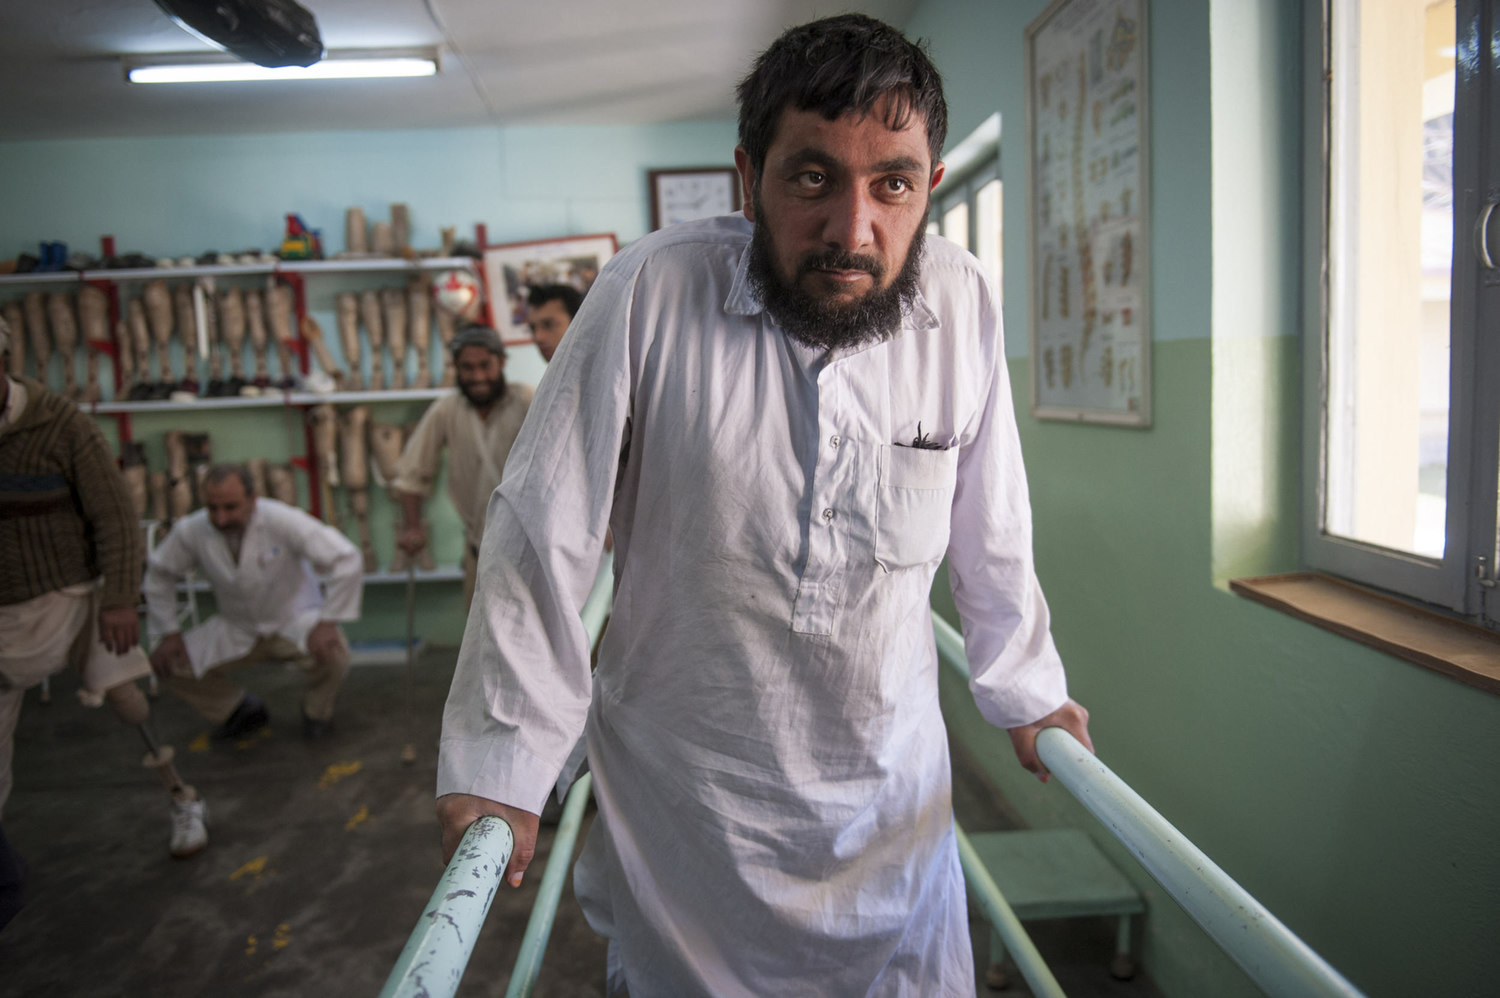  Gholom Rasol holds on to rails to assist him while walking at the International Center for the Red Cross in Herat, Afghanistan. Rasol, from Guzara outside of Herat, lost both of his legs in a what is believed to be a car bombing organized by the Tal